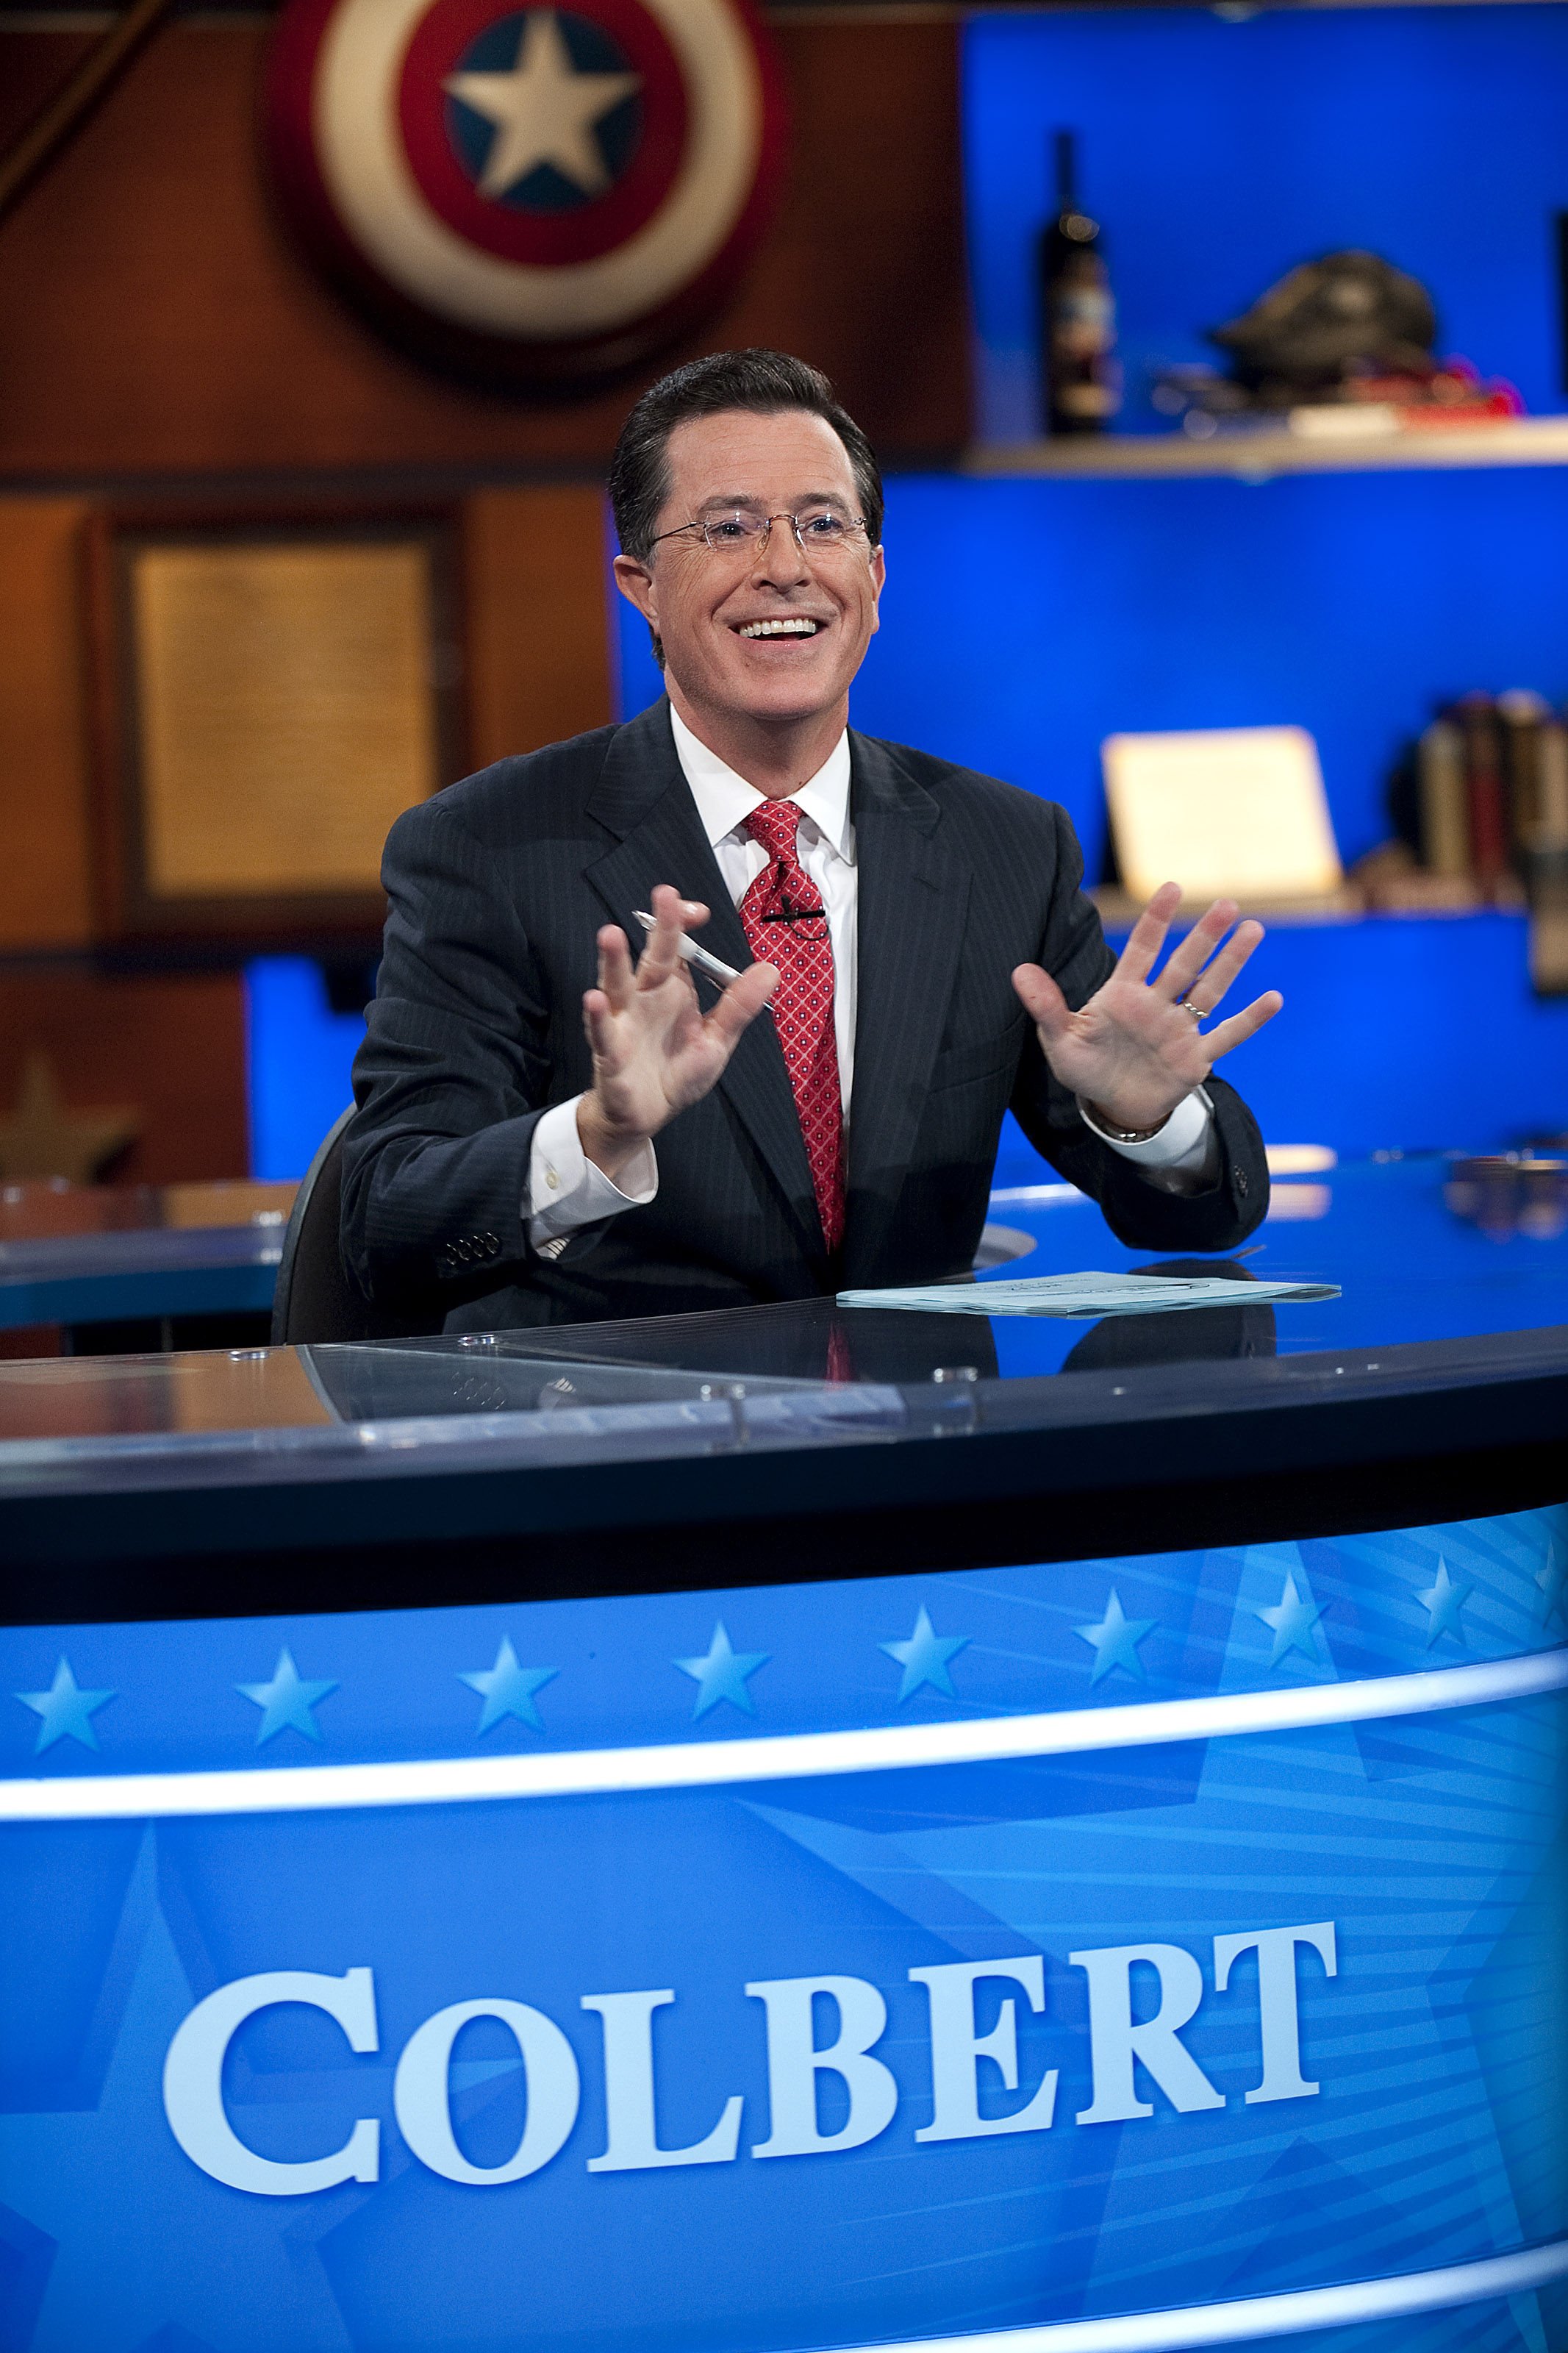 Stephen Colbert during the "Been There: Won That: The Returnification of the American-Do Troopscapeon" special of The Colbert Report on Sept. 8, 2010 in New York City.